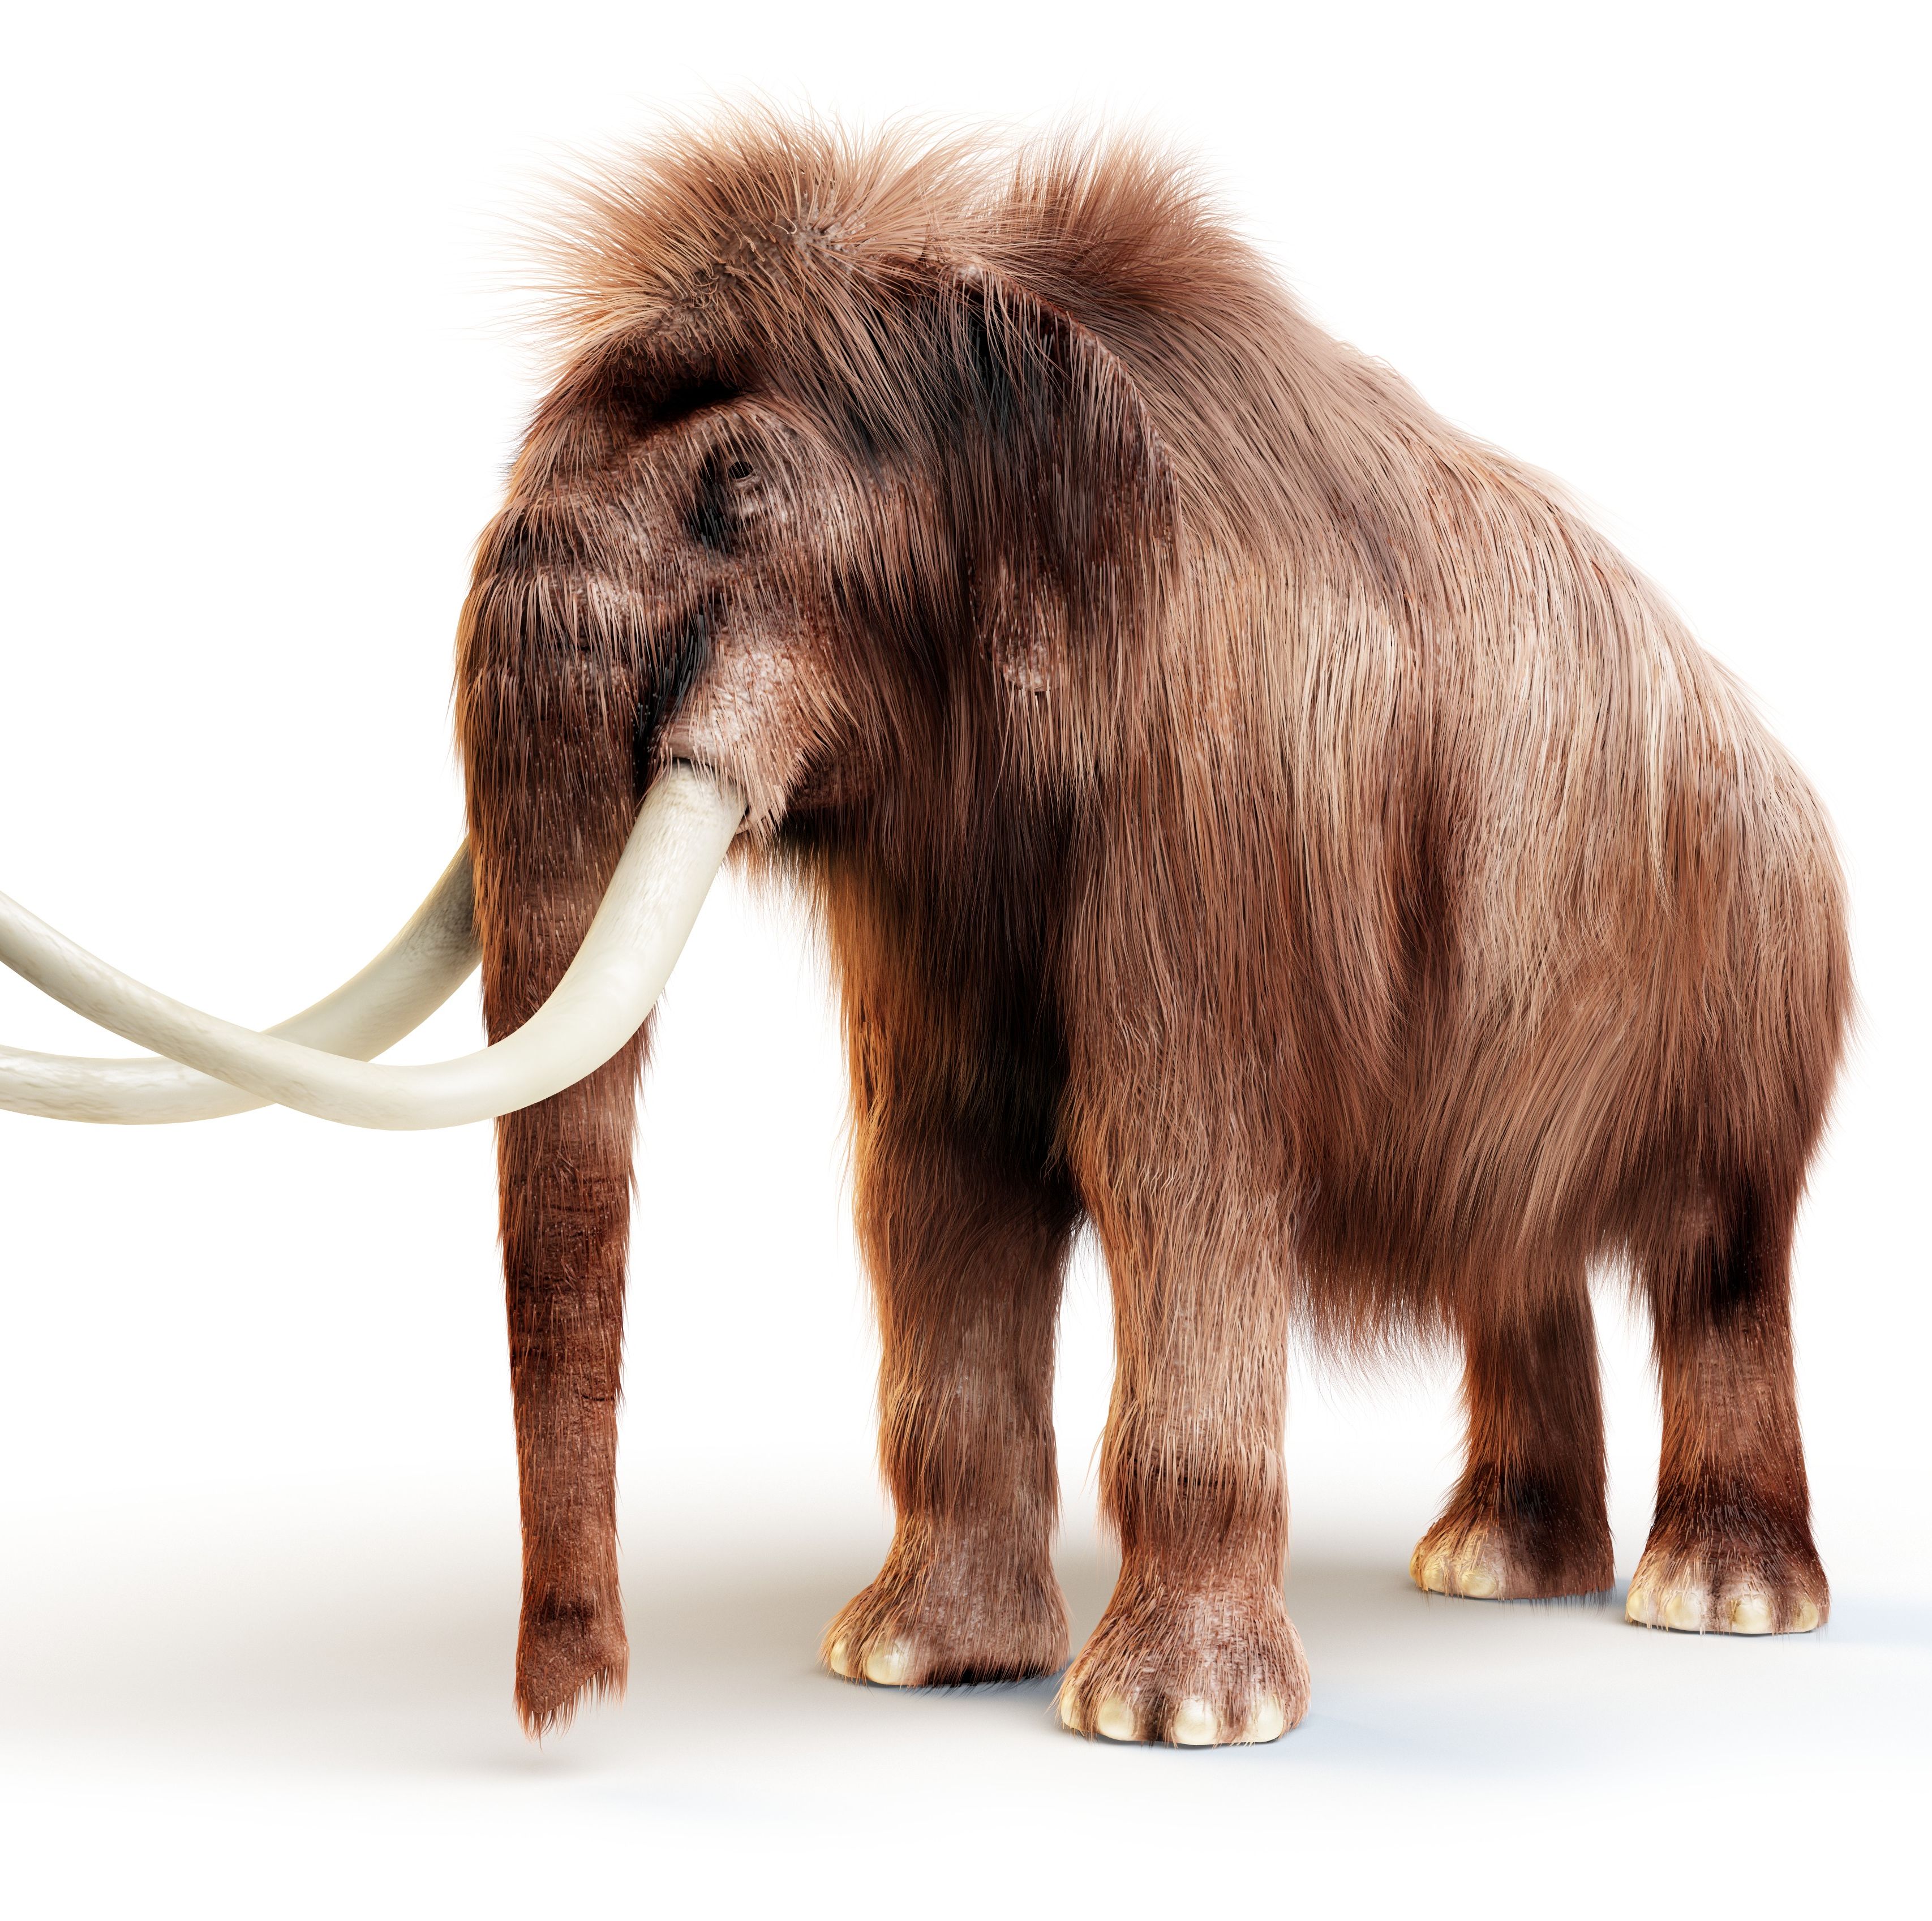 Scientists Said They'd Resurrect the Woolly Mammoth by 2027. They're Really Close.